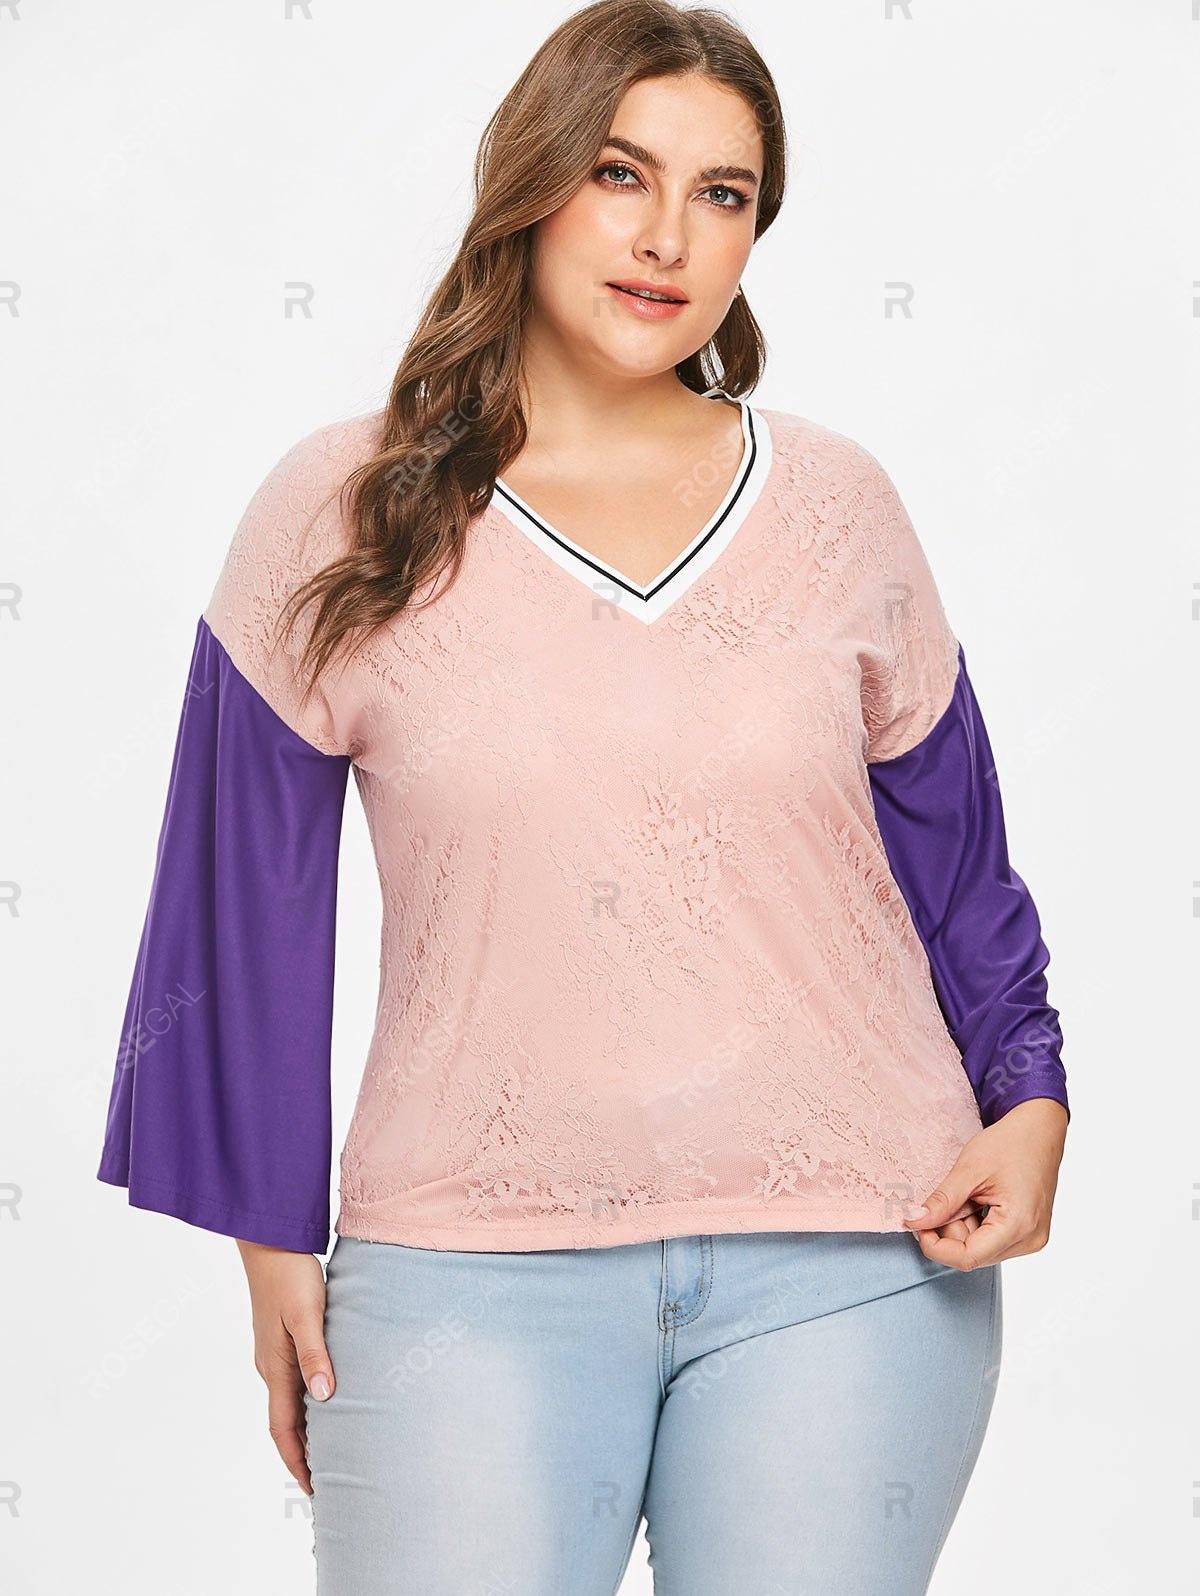 Rosegal Plus Size Color Block Eyelash Lace Top in Pink - Lyst